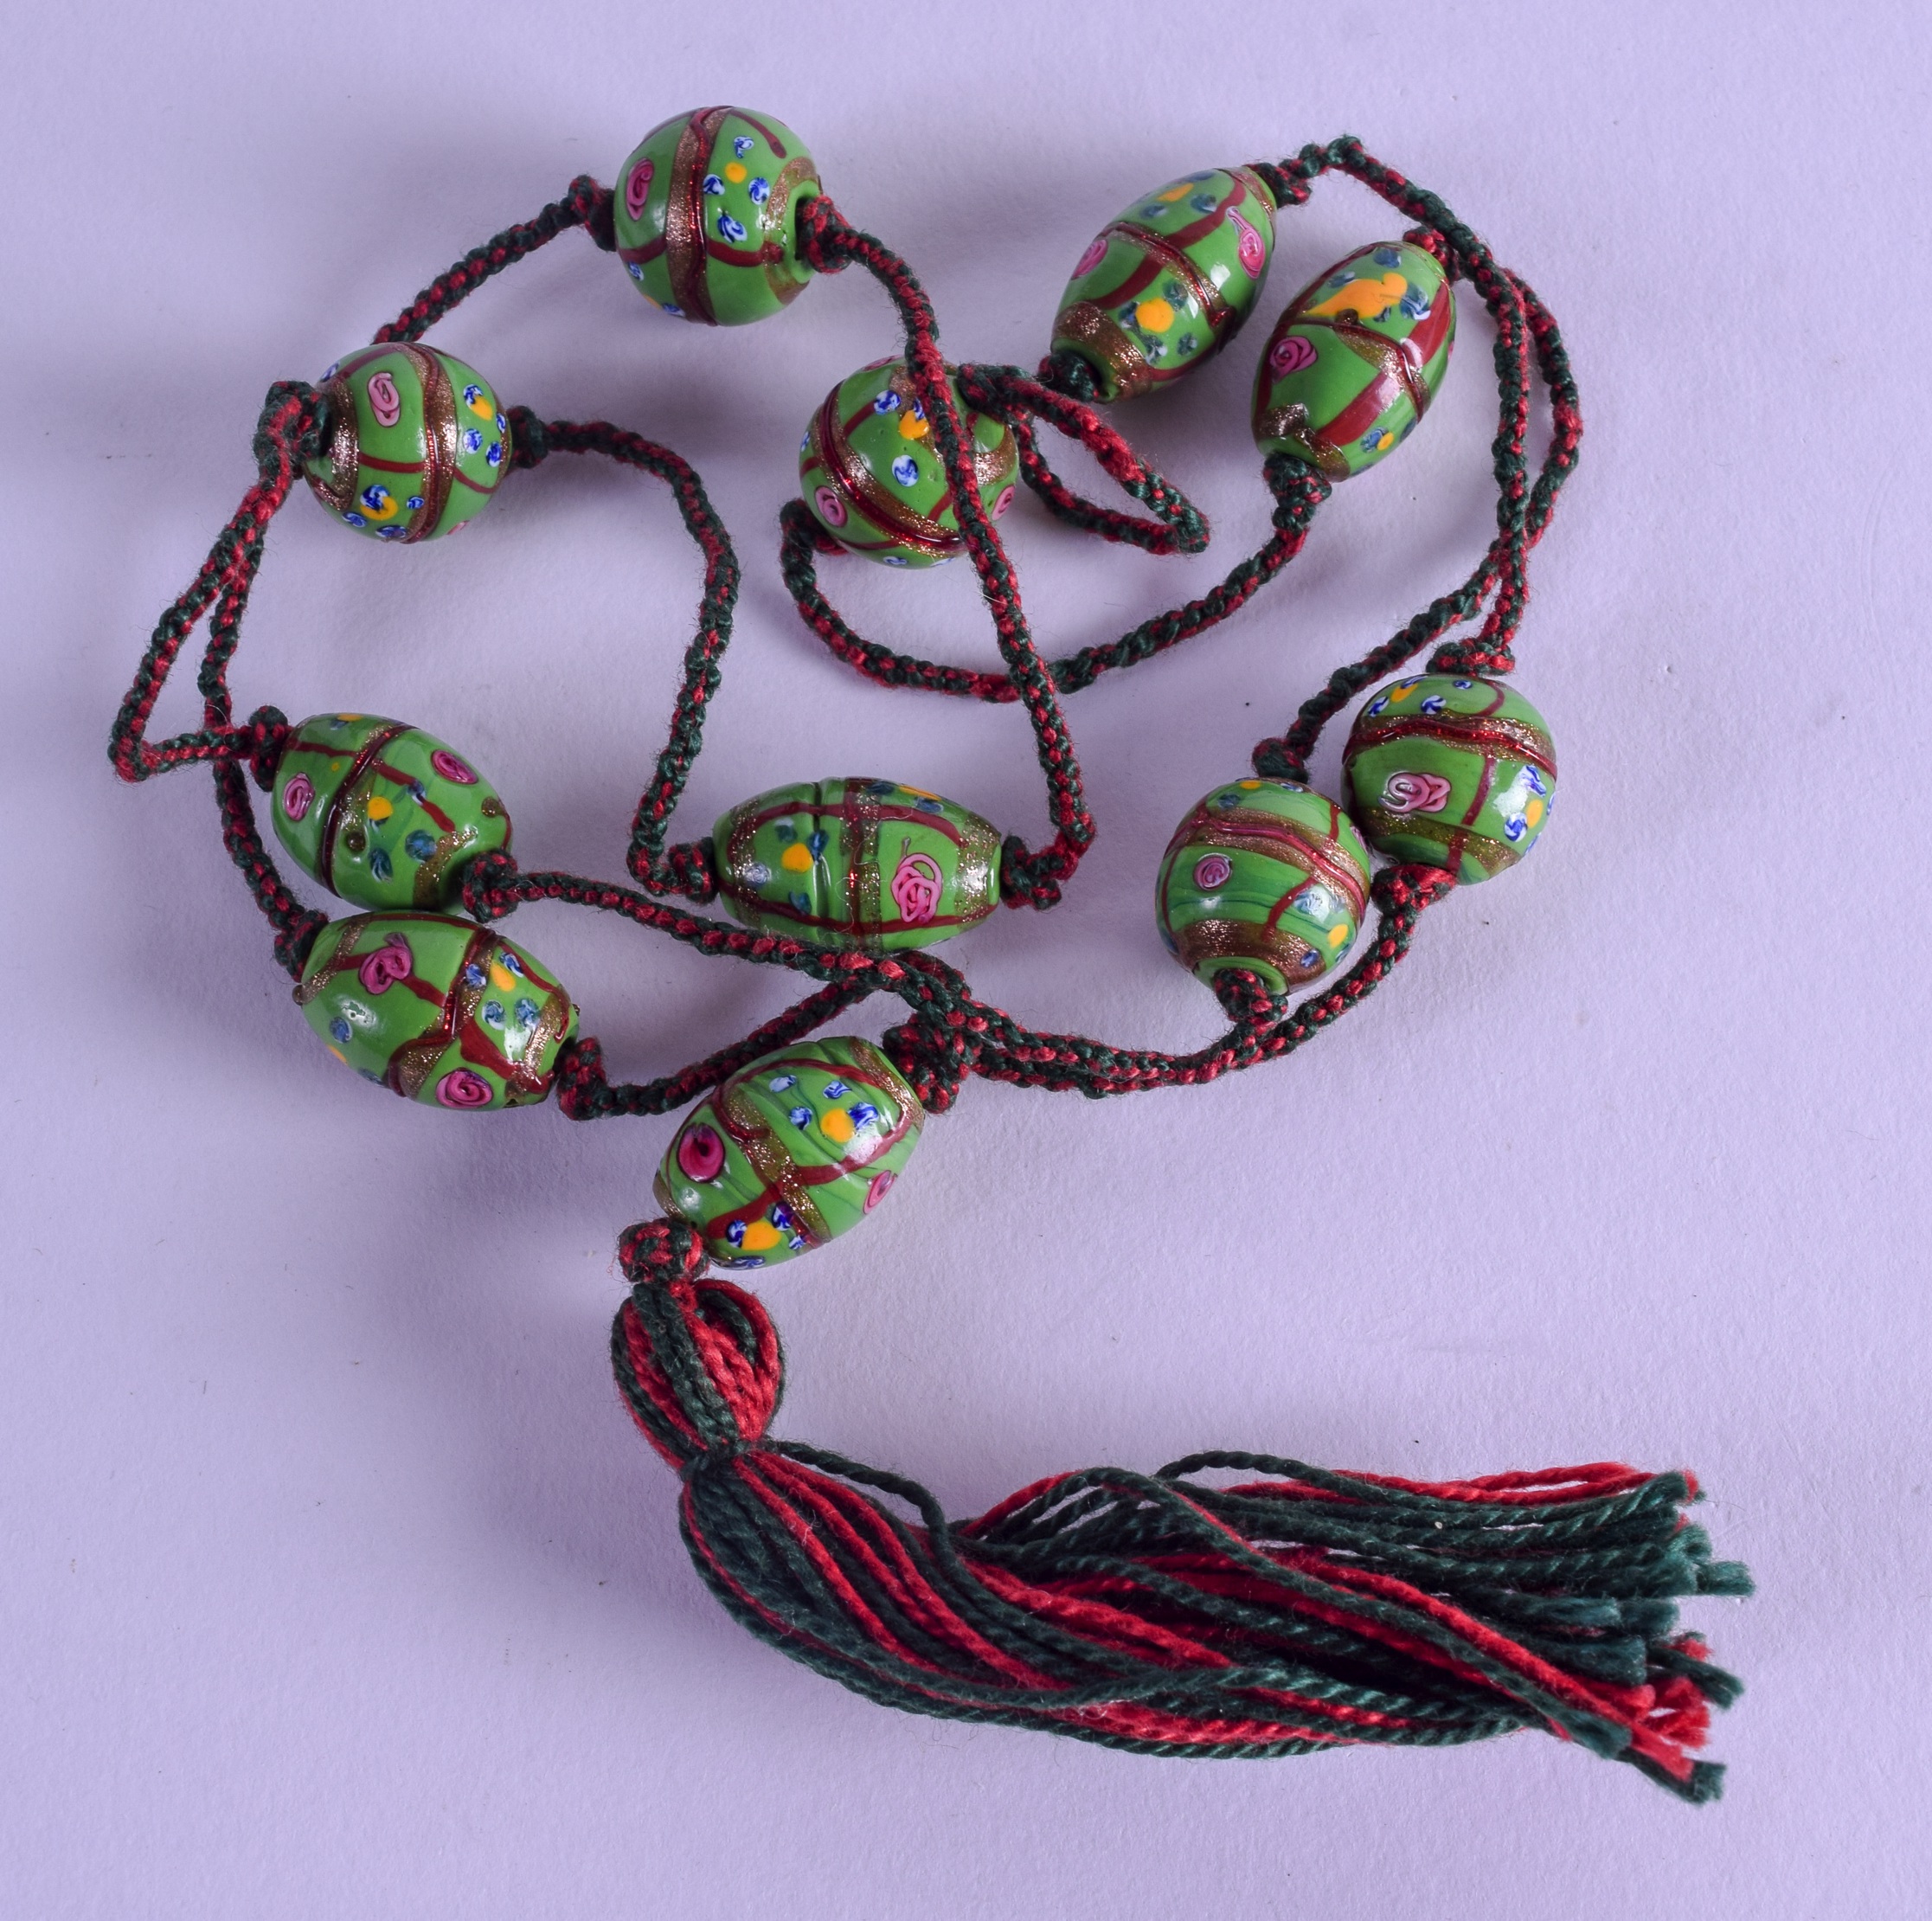 AN EARLY 20TH CENTURY CONTINENTAL ENAMELLED GLASS NECKLACE. 88 cm long.